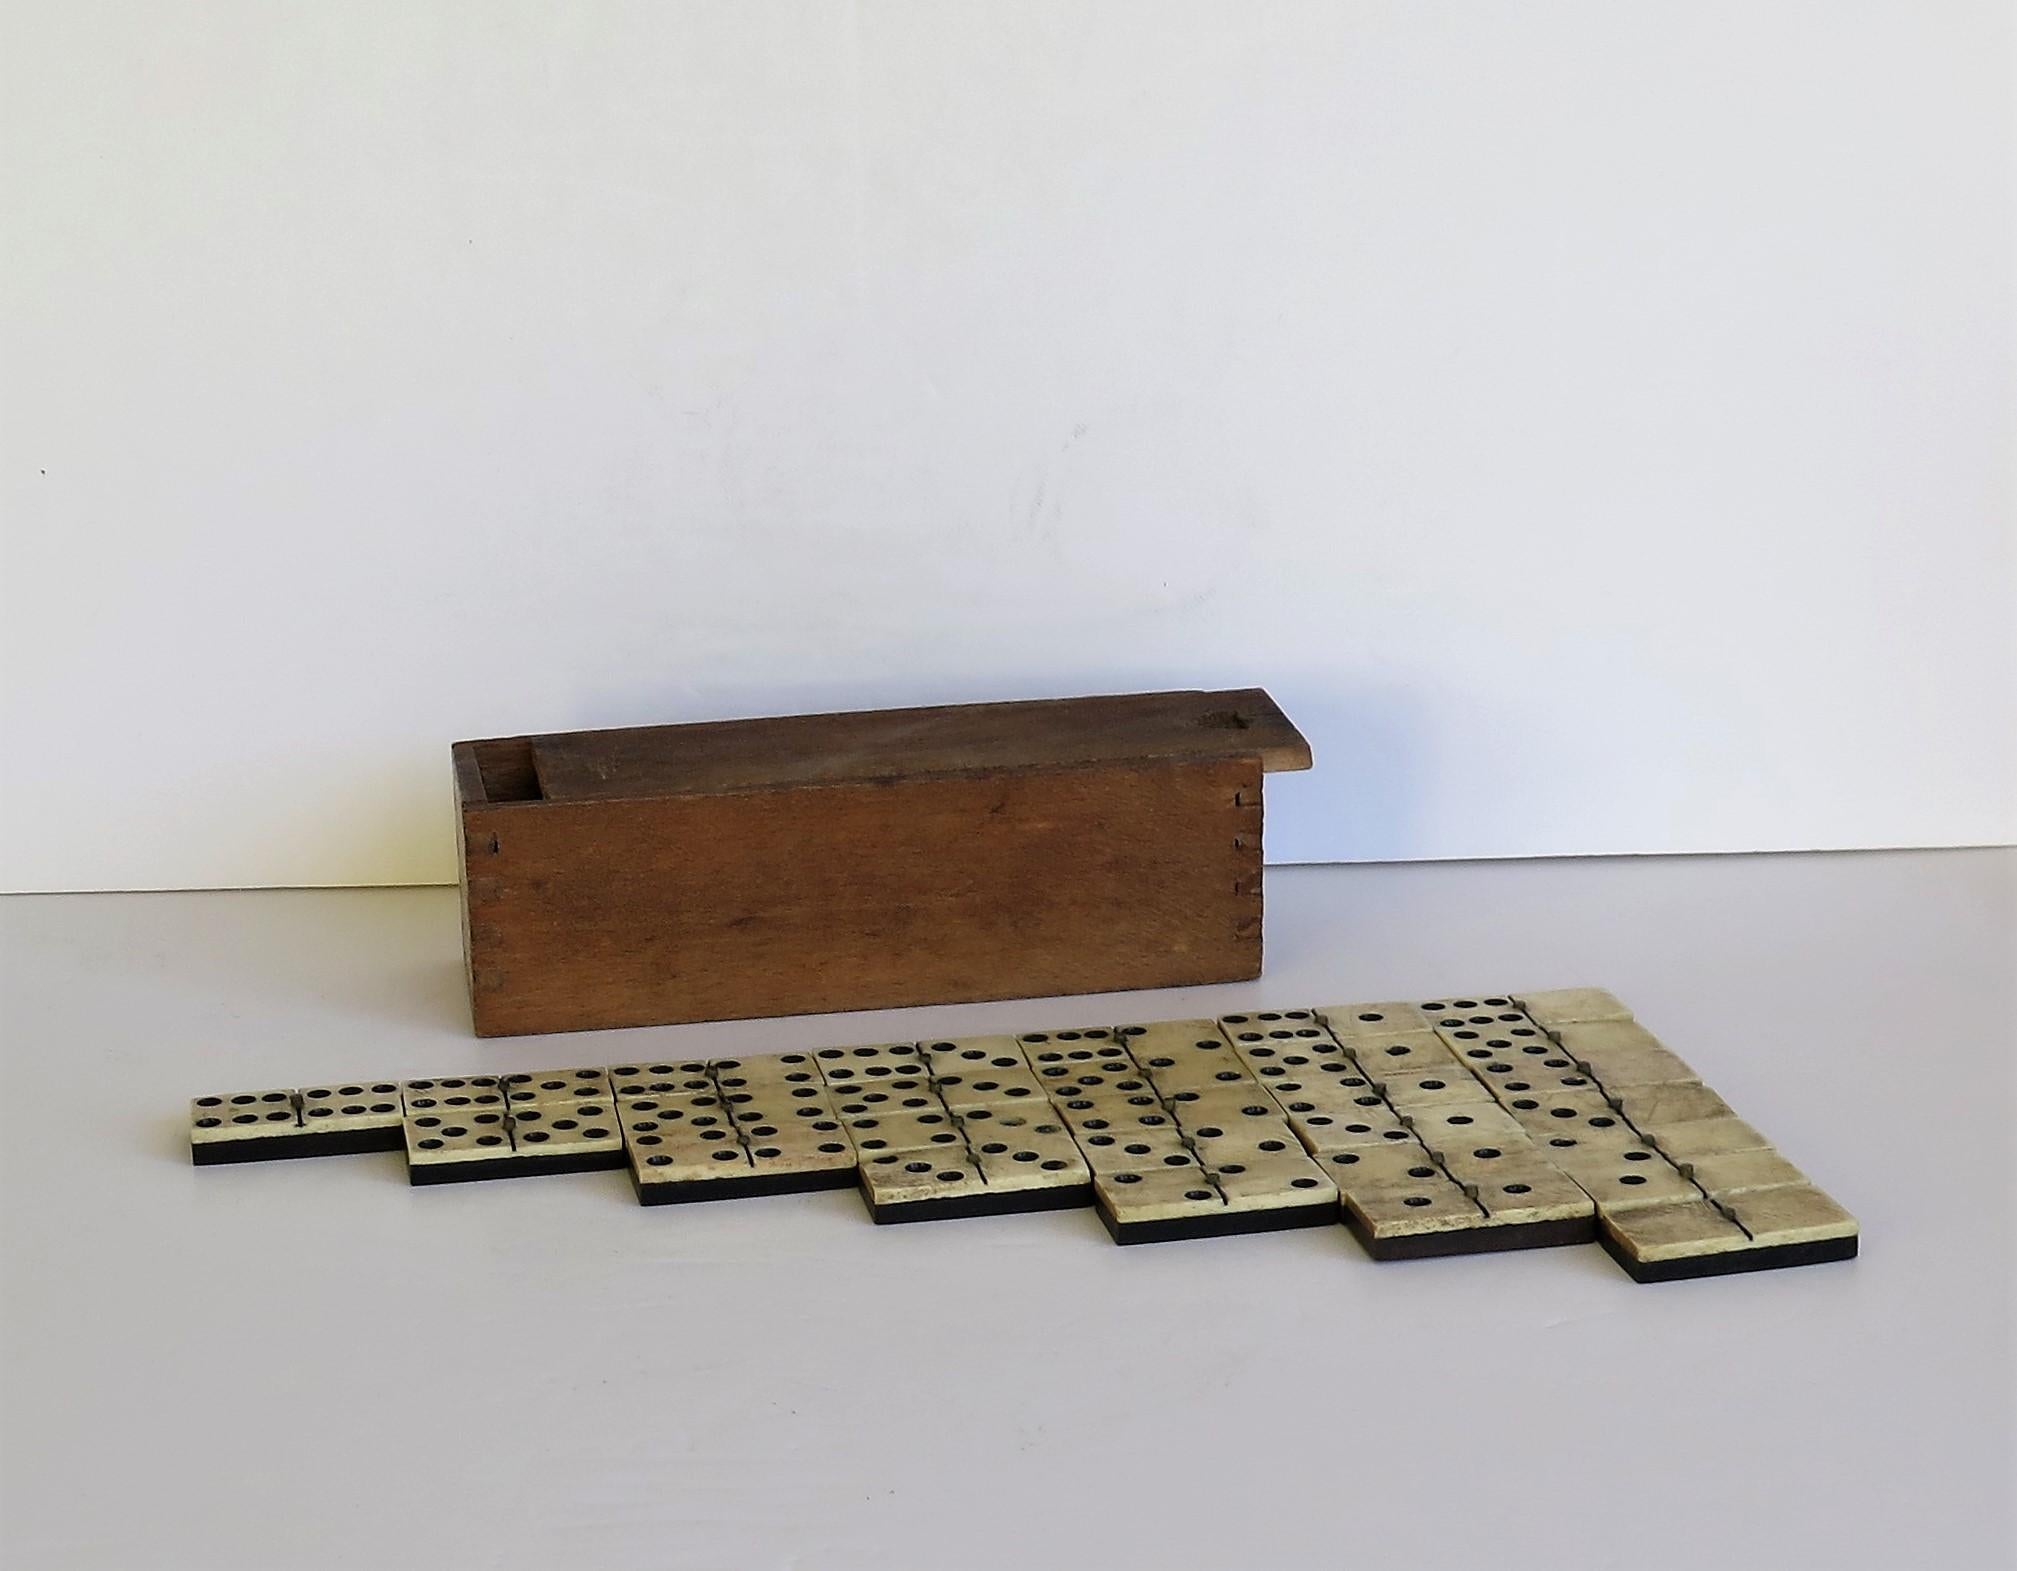 This is an original and complete Domino game, coming with its own jointed wooden storage box with a sliding lid, all dating to Victorian England, circa 1870.

Dominoes is a classic game of strategy and fun to play for all age groups. This set has